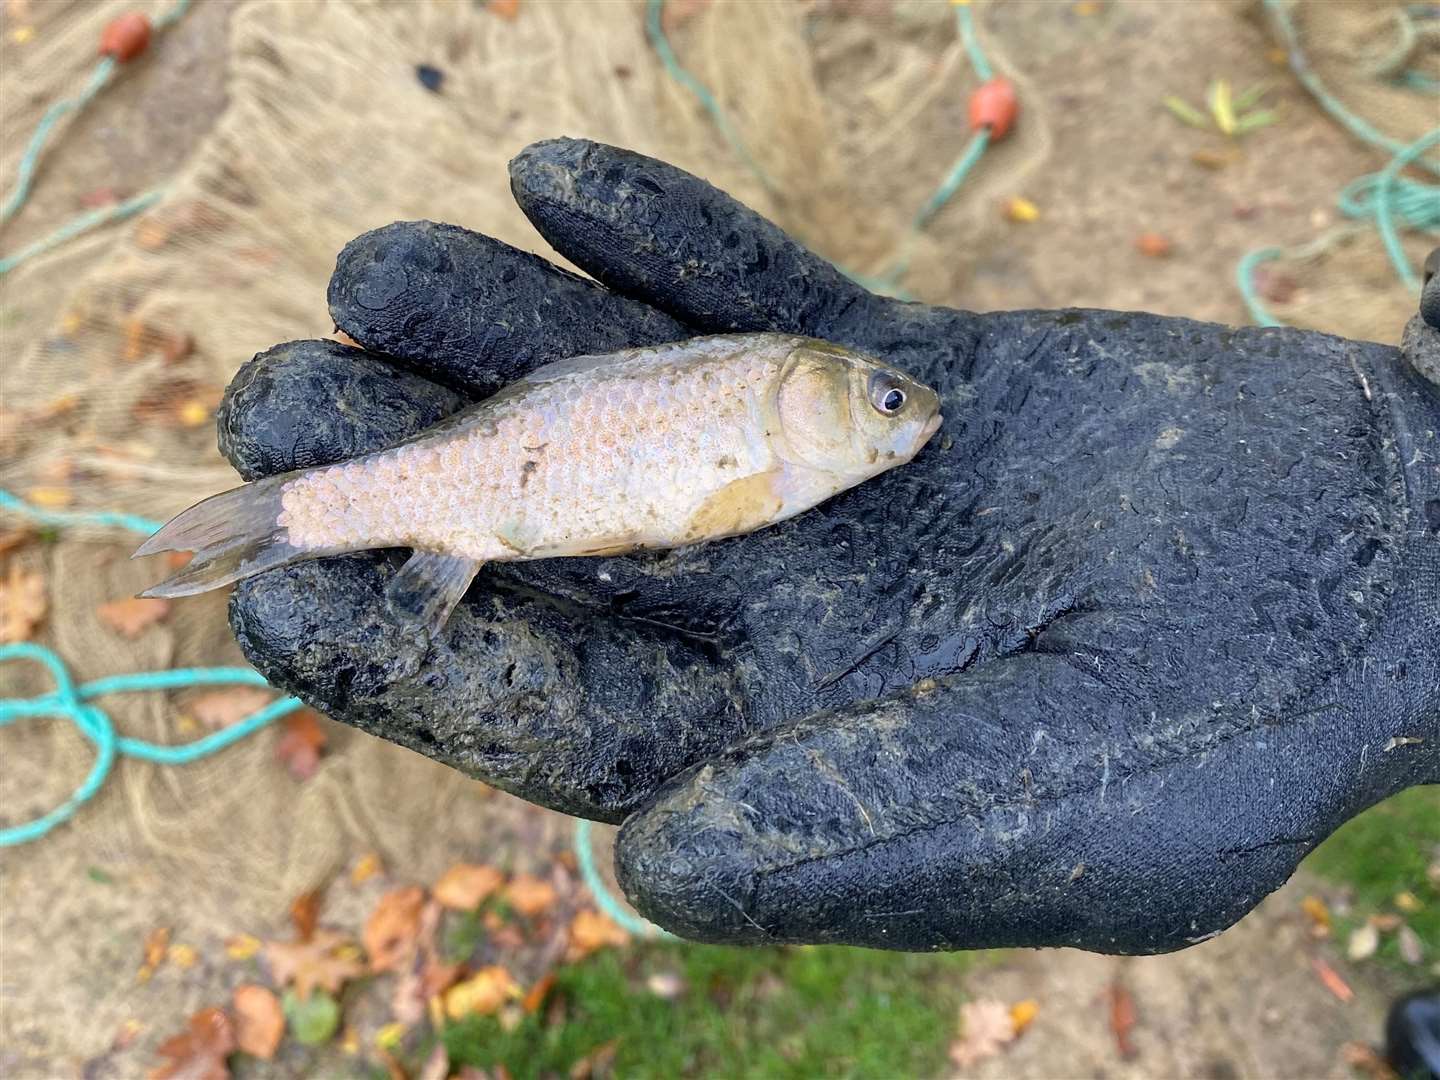 Prussian carp were found in the pond. Picture: Brenchley and Matfield Parish Council